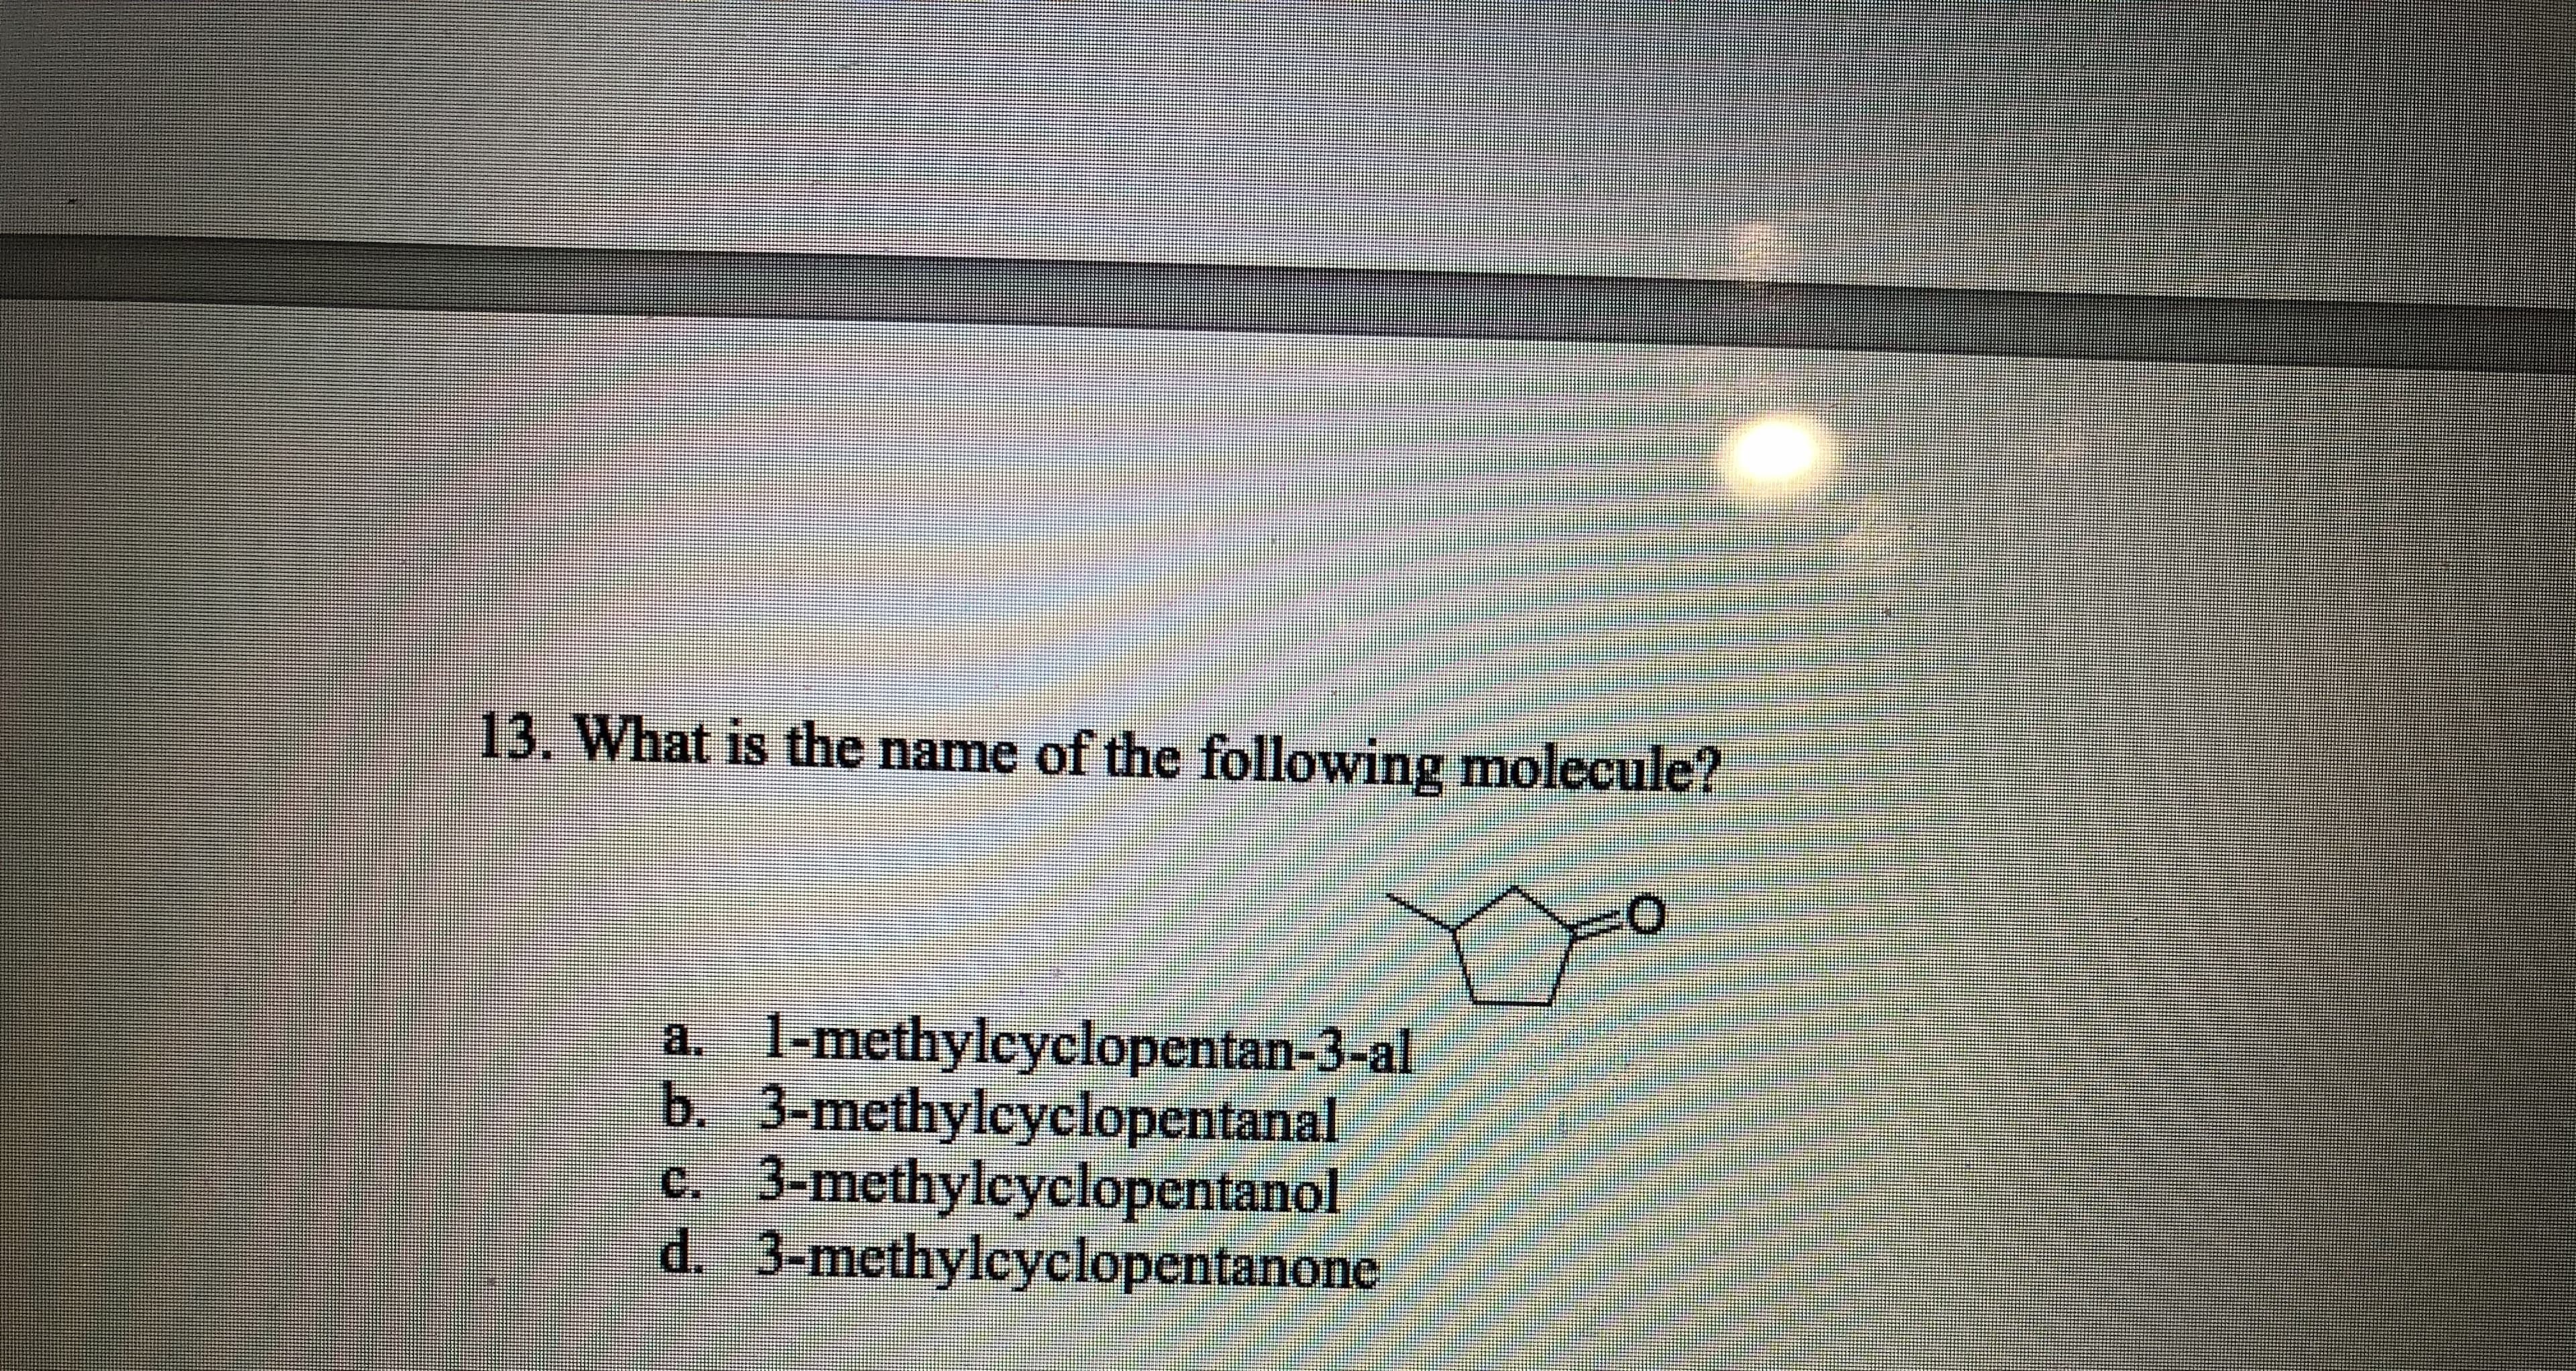 13. What is the name of the following molecule?
1-methylcyclopentan-3-al
b. 3-methylcyclopentanal
c. 3-methylcyclopentanol
d. 3-methylcyclopentanone
a.
